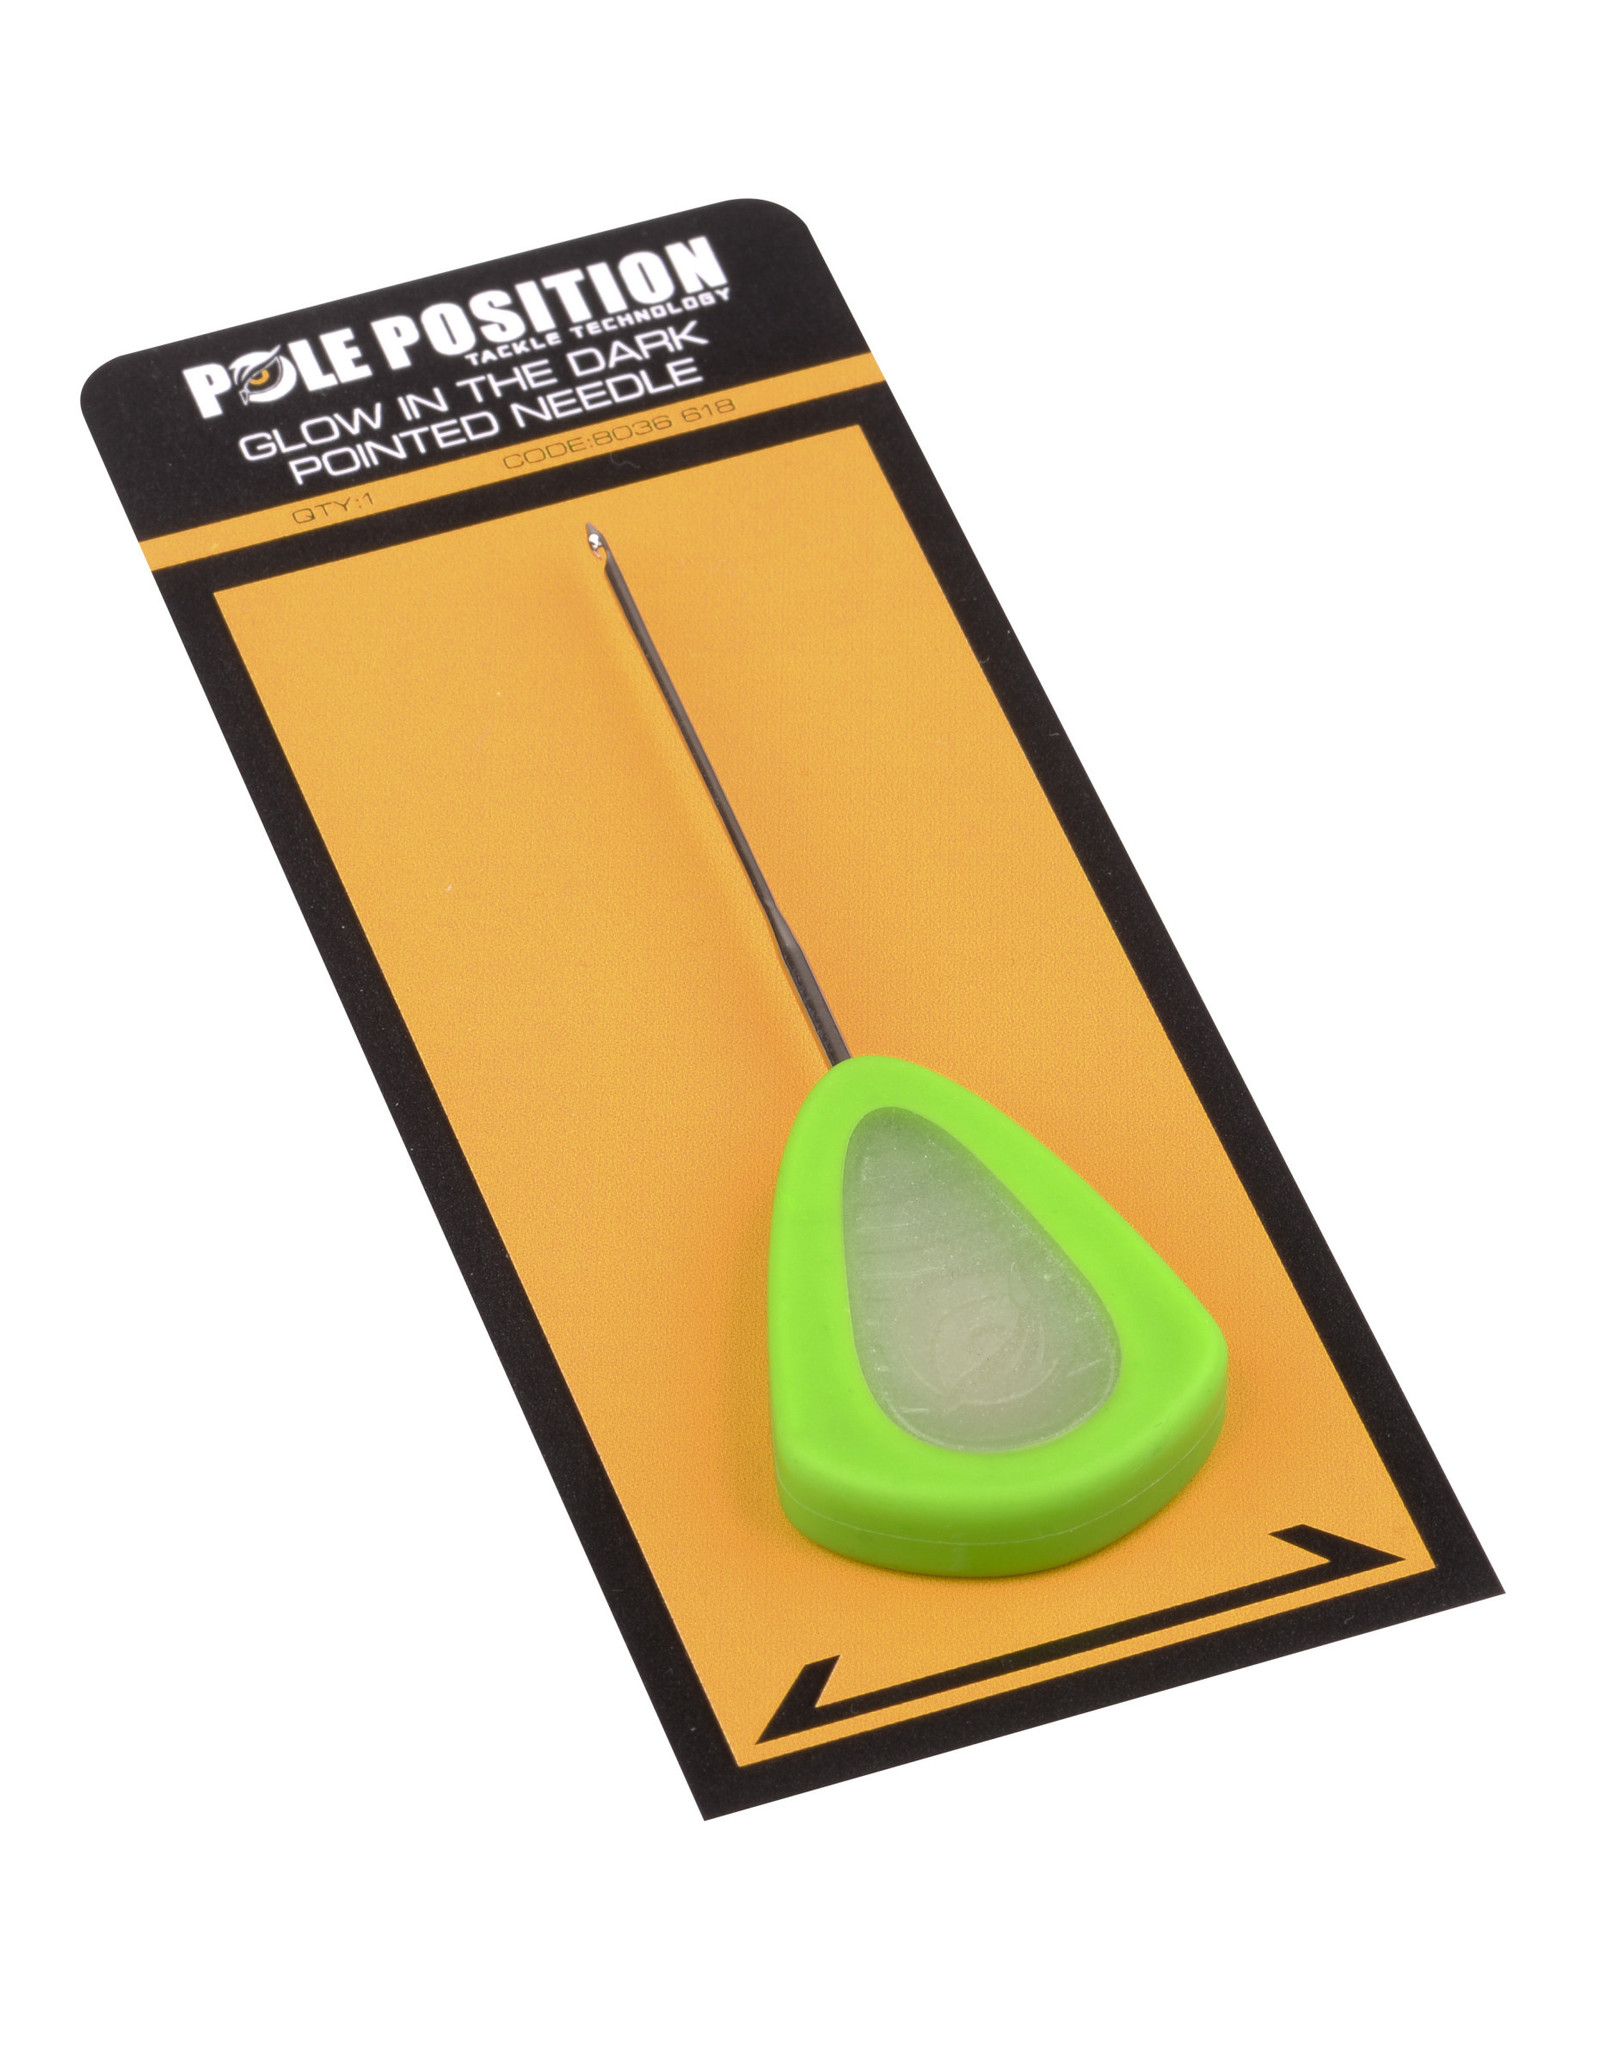 Pole position GLOW IN THE DARK POINTED NEEDLE GREEN